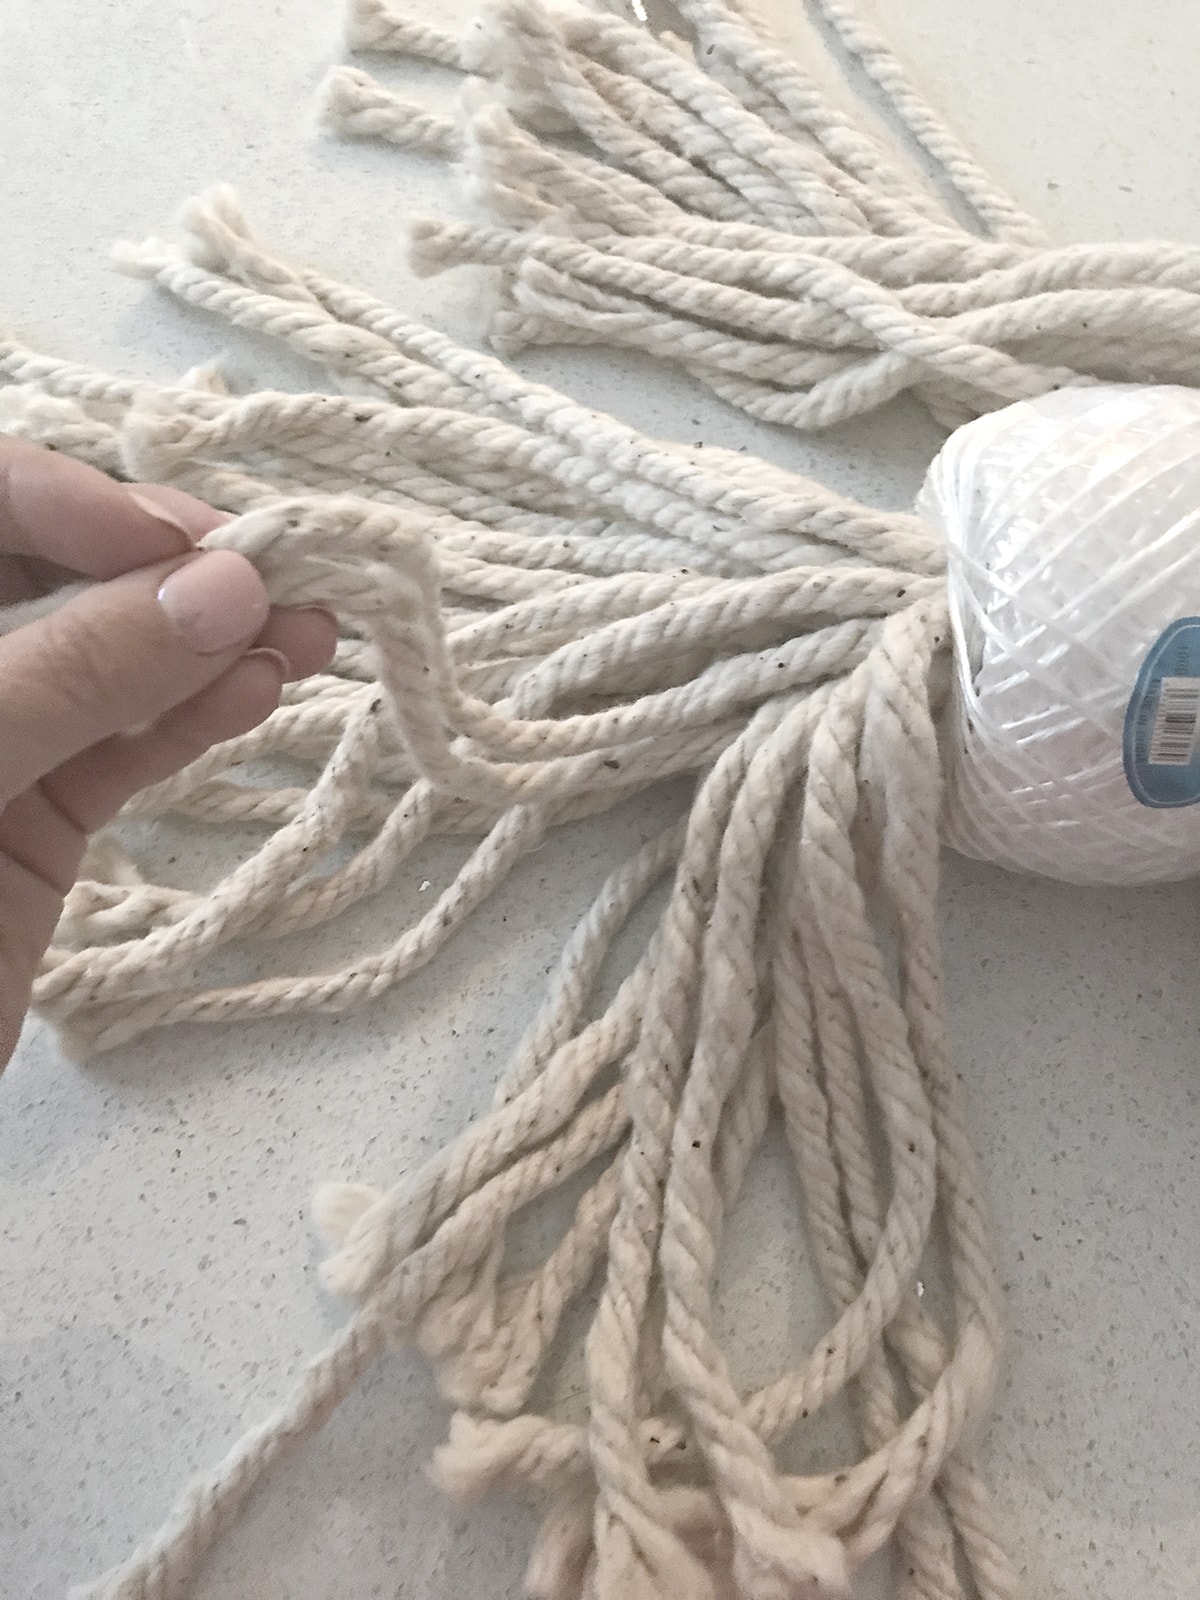 unthreading the mop head yarn to give it more volume 